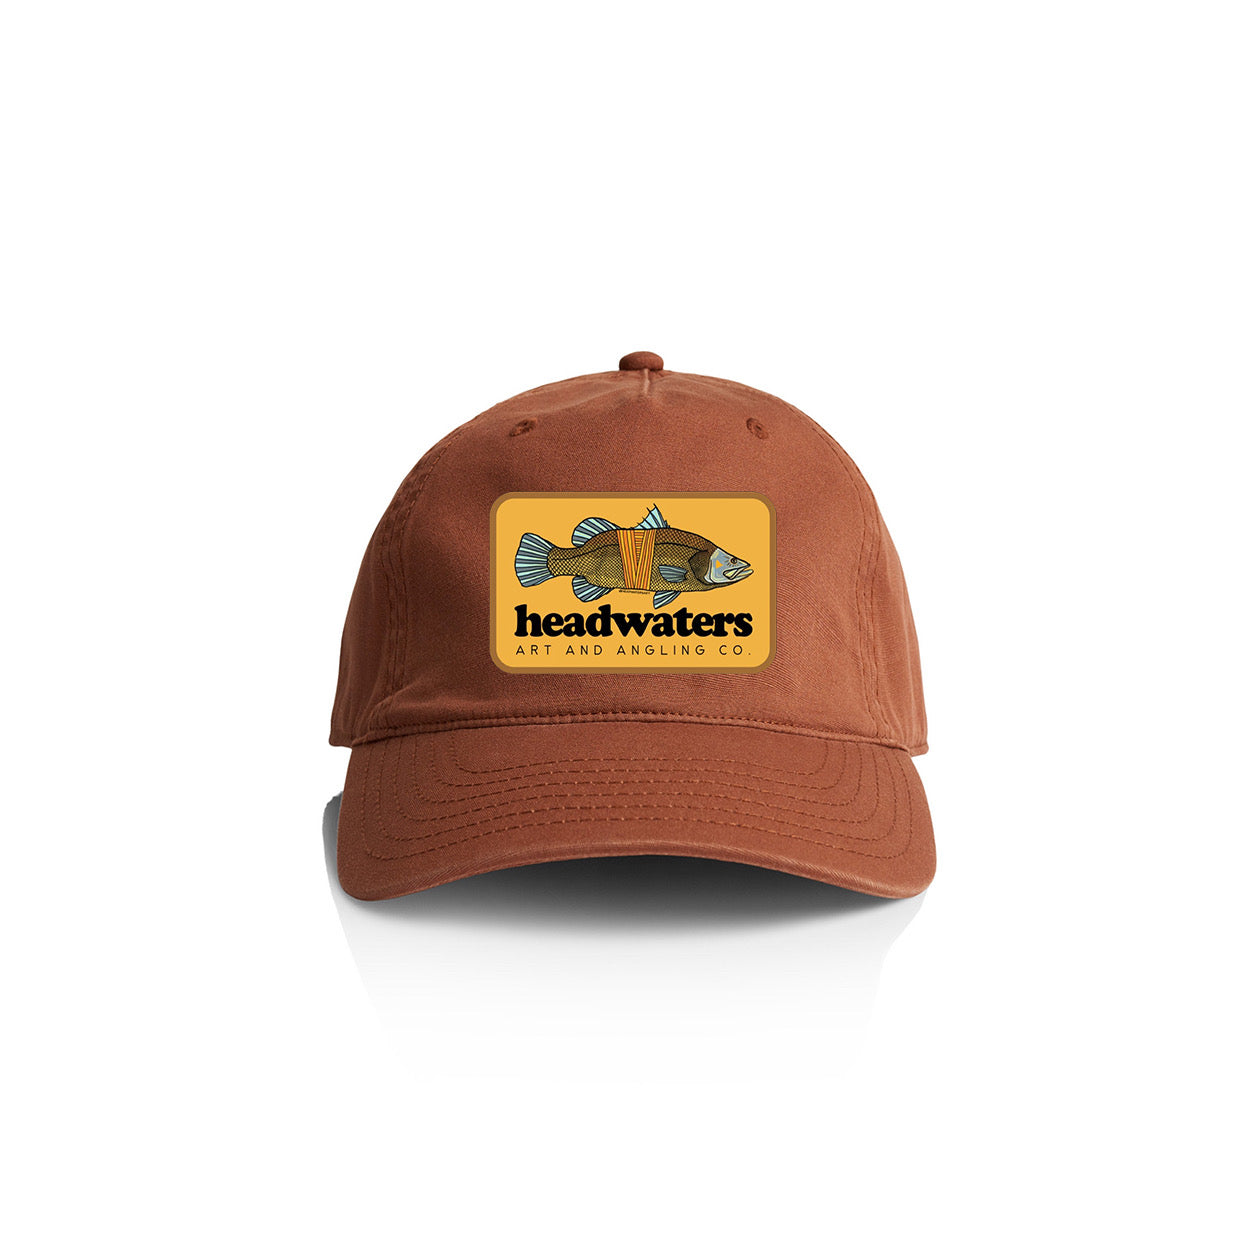 Access hats – Headwaters Art and Angling Co